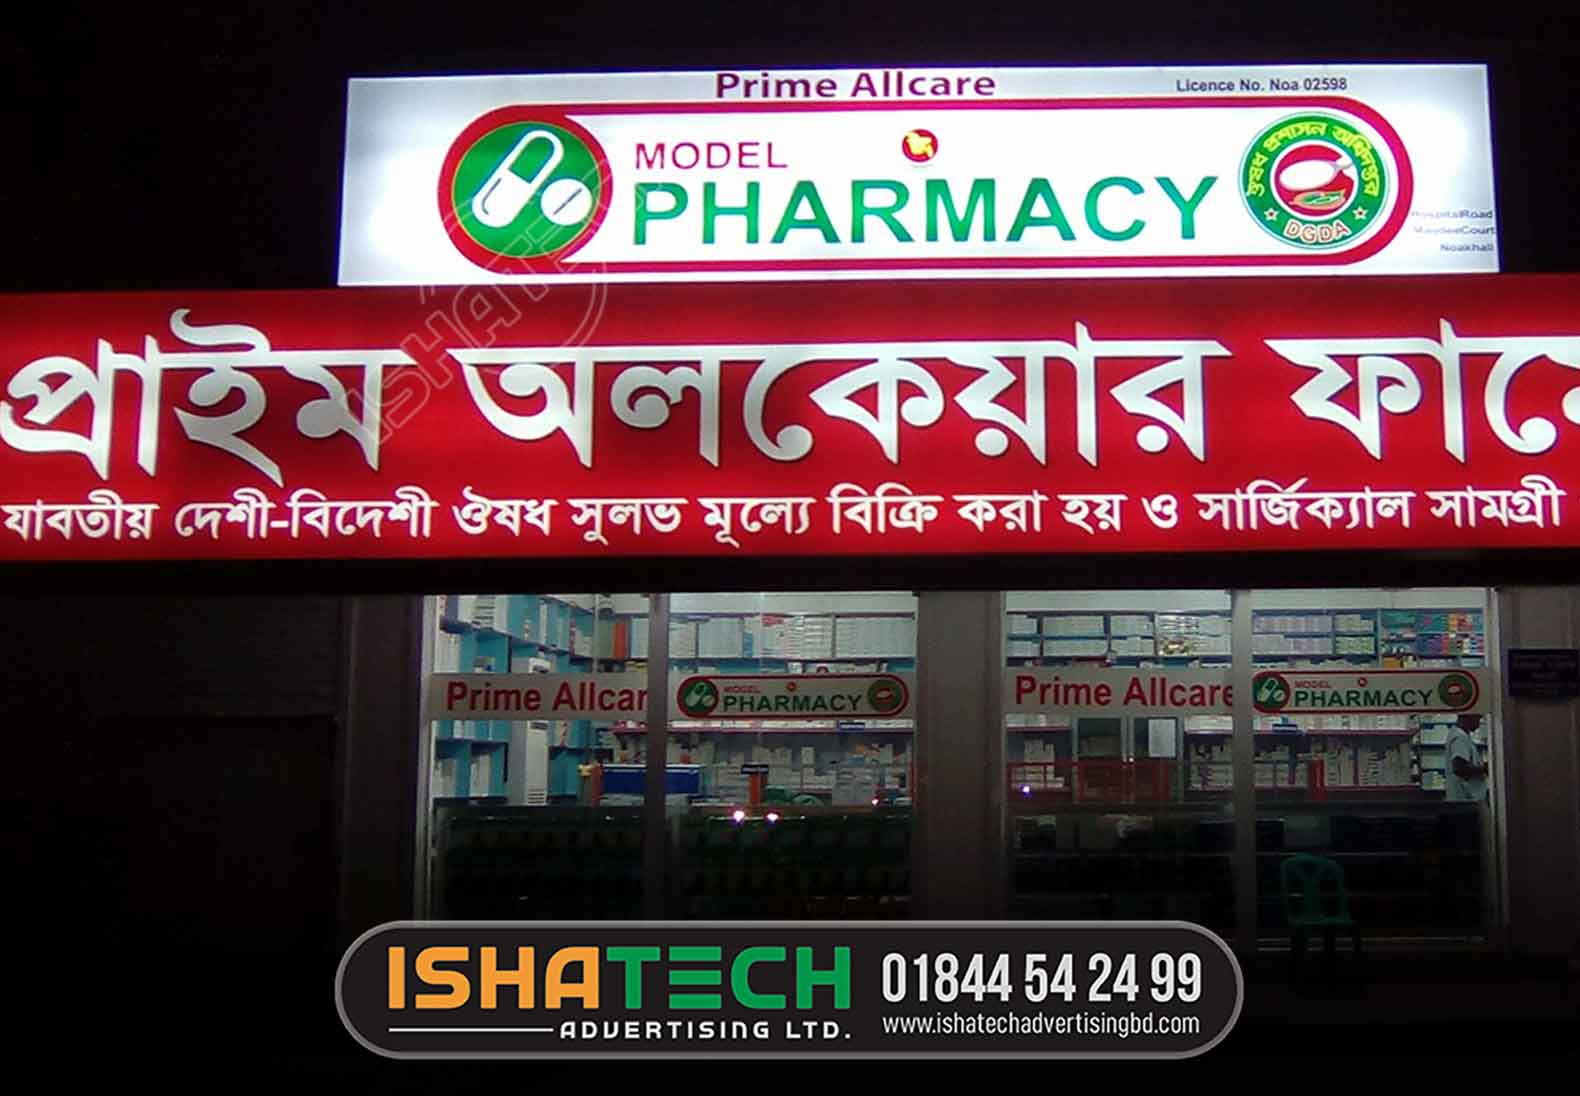 SIGNBOARD COMPANY, BILLBOARD COMPANY, NAME PLATE COMPANY IN DHAKA, BANGLADESH. PRIME AL CARE PHARMCY SHOP FRONT PROFOLE LIGHTING SIGNBOARD MAKING BY ISHATECH ADVERTISING LTD